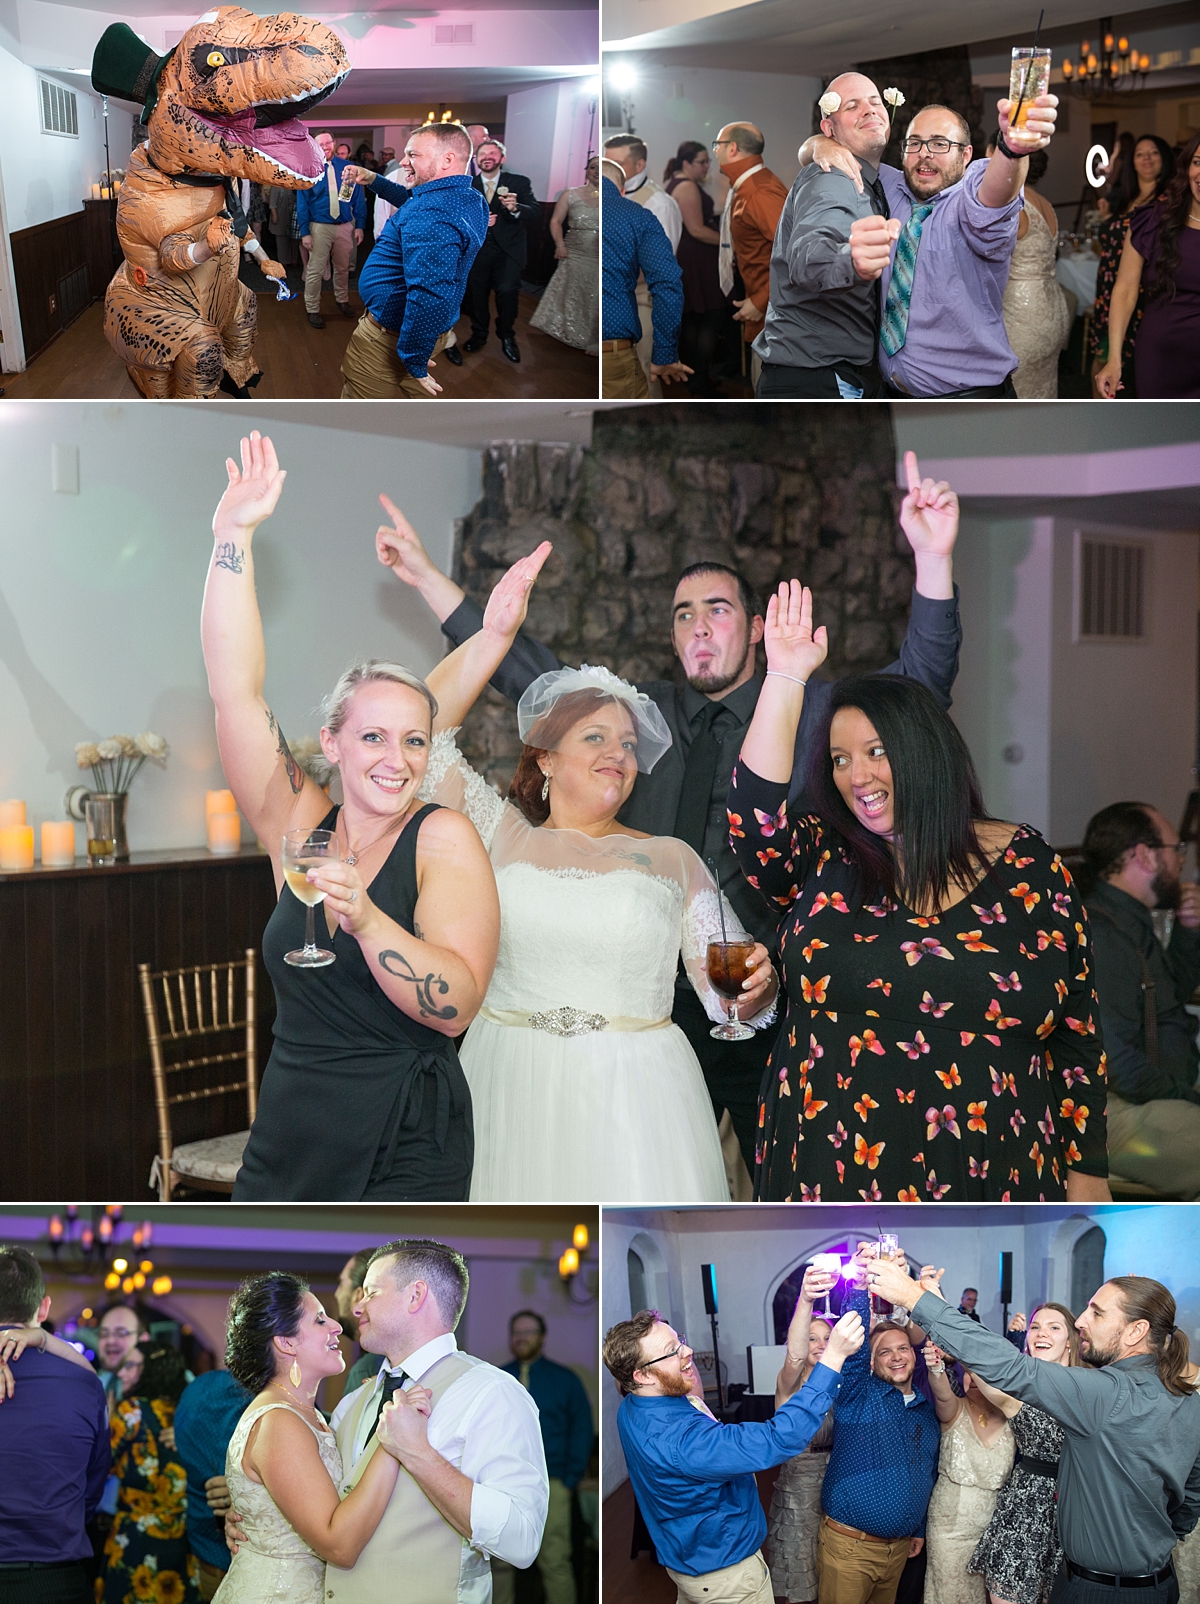 wedding reception guests dancing, blow up dinosaur at wedding reception, beardslee castle, little falls, ny, sarah heppell photography